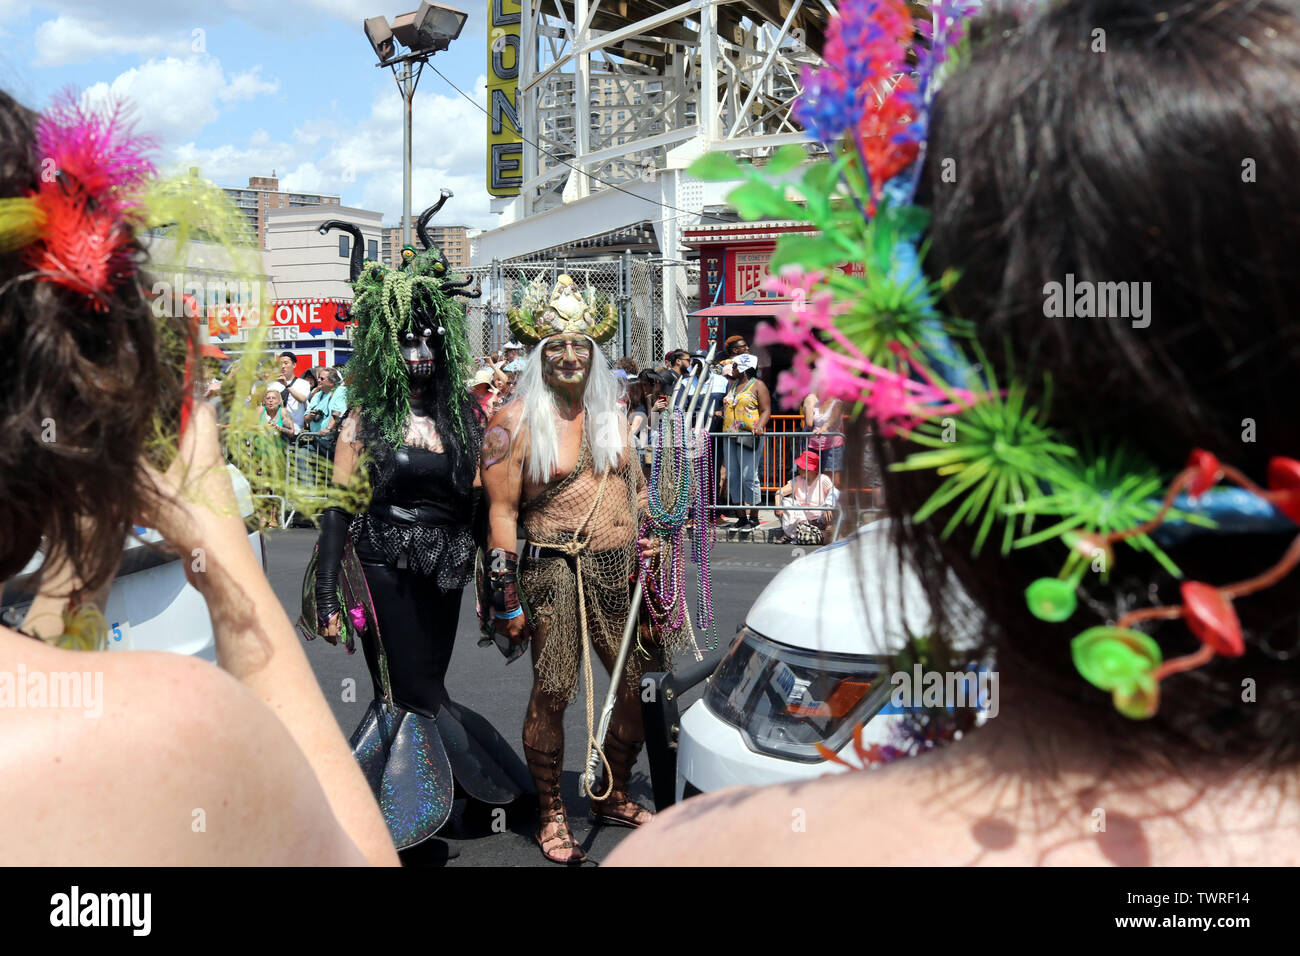 New York City, New York, USA. 22nd June, 2019. The 37th. annual mermaid parade kicked-off the summer season on 22 June, 2019, with a parade down Surf Avenue featuring an assortment of floats, marching bands and colorful costumed revelers at the seaside leisure and entertainment destination of Coney Island in Brooklyn, New York. Credit: G. Ronald Lopez/ZUMA Wire/Alamy Live News Stock Photo